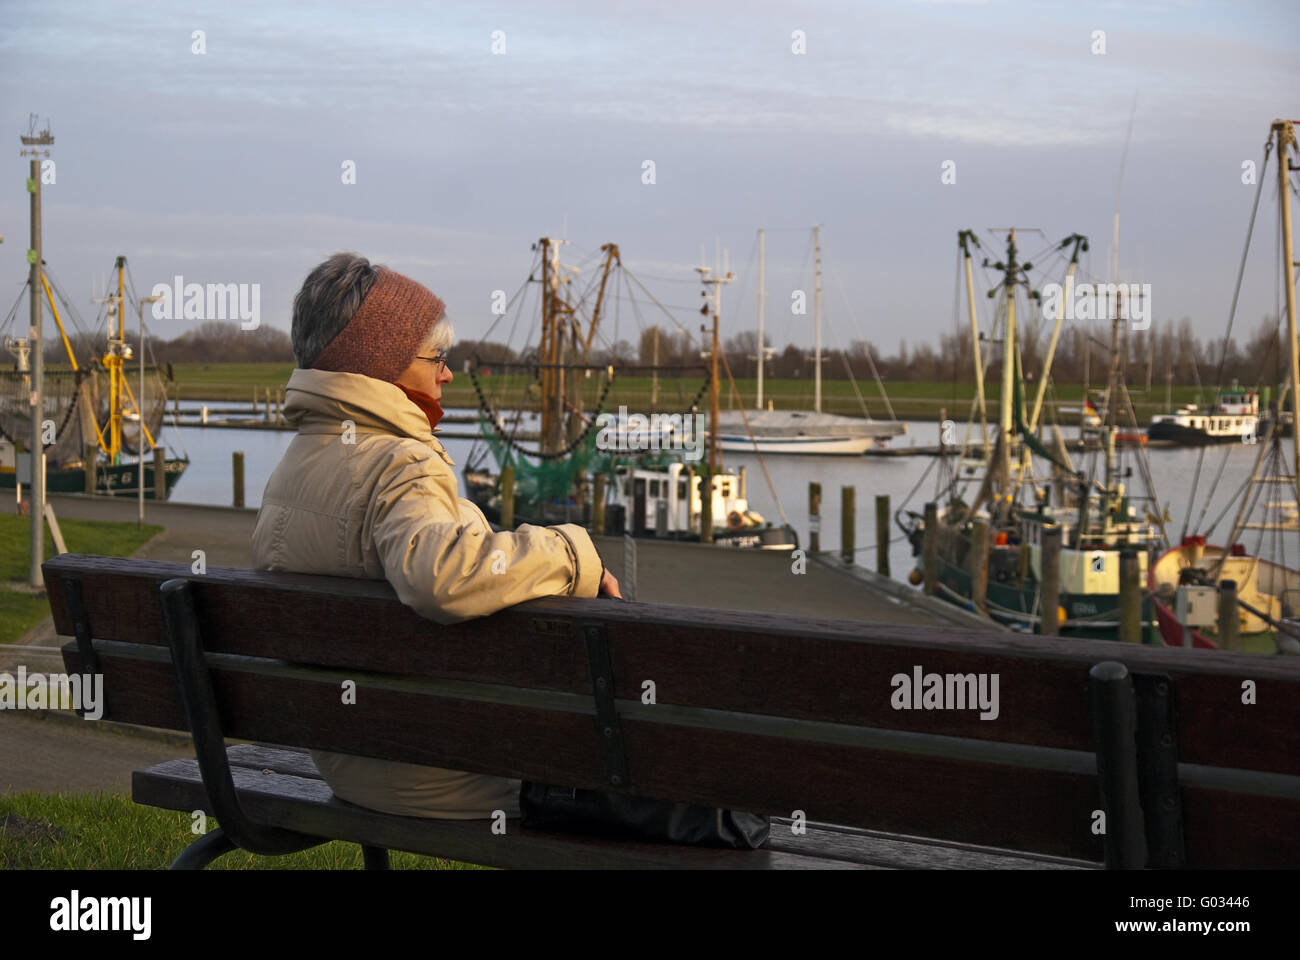 Woman sitting on a bench and watch ships in the ha Stock Photo